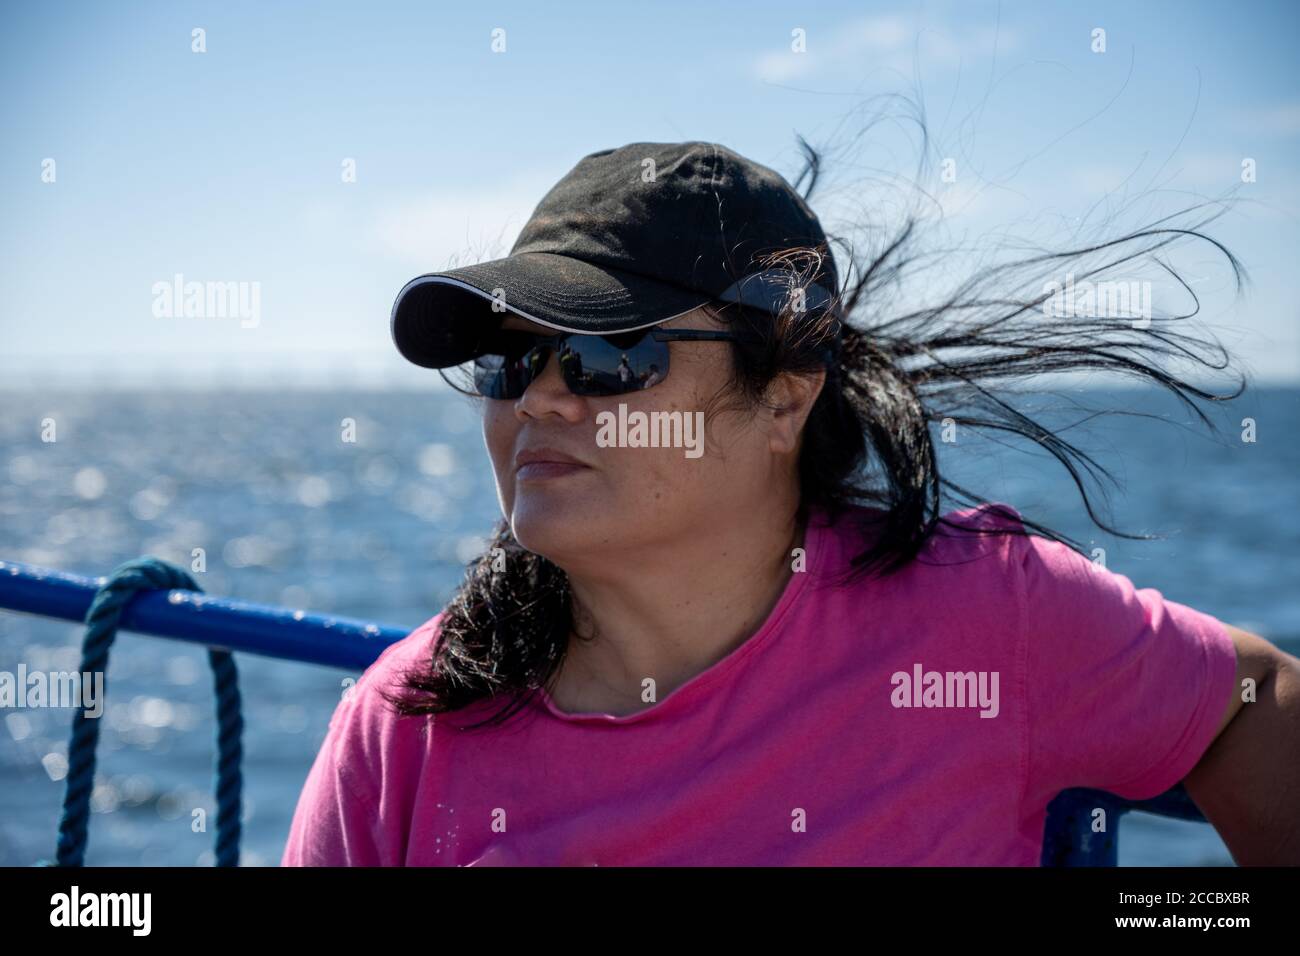 A middle-aged Asian woman on a boat trip a hot summer day on the ocean outside Malmo, Sweden. Bright blue sky and ocean in the background Stock Photo